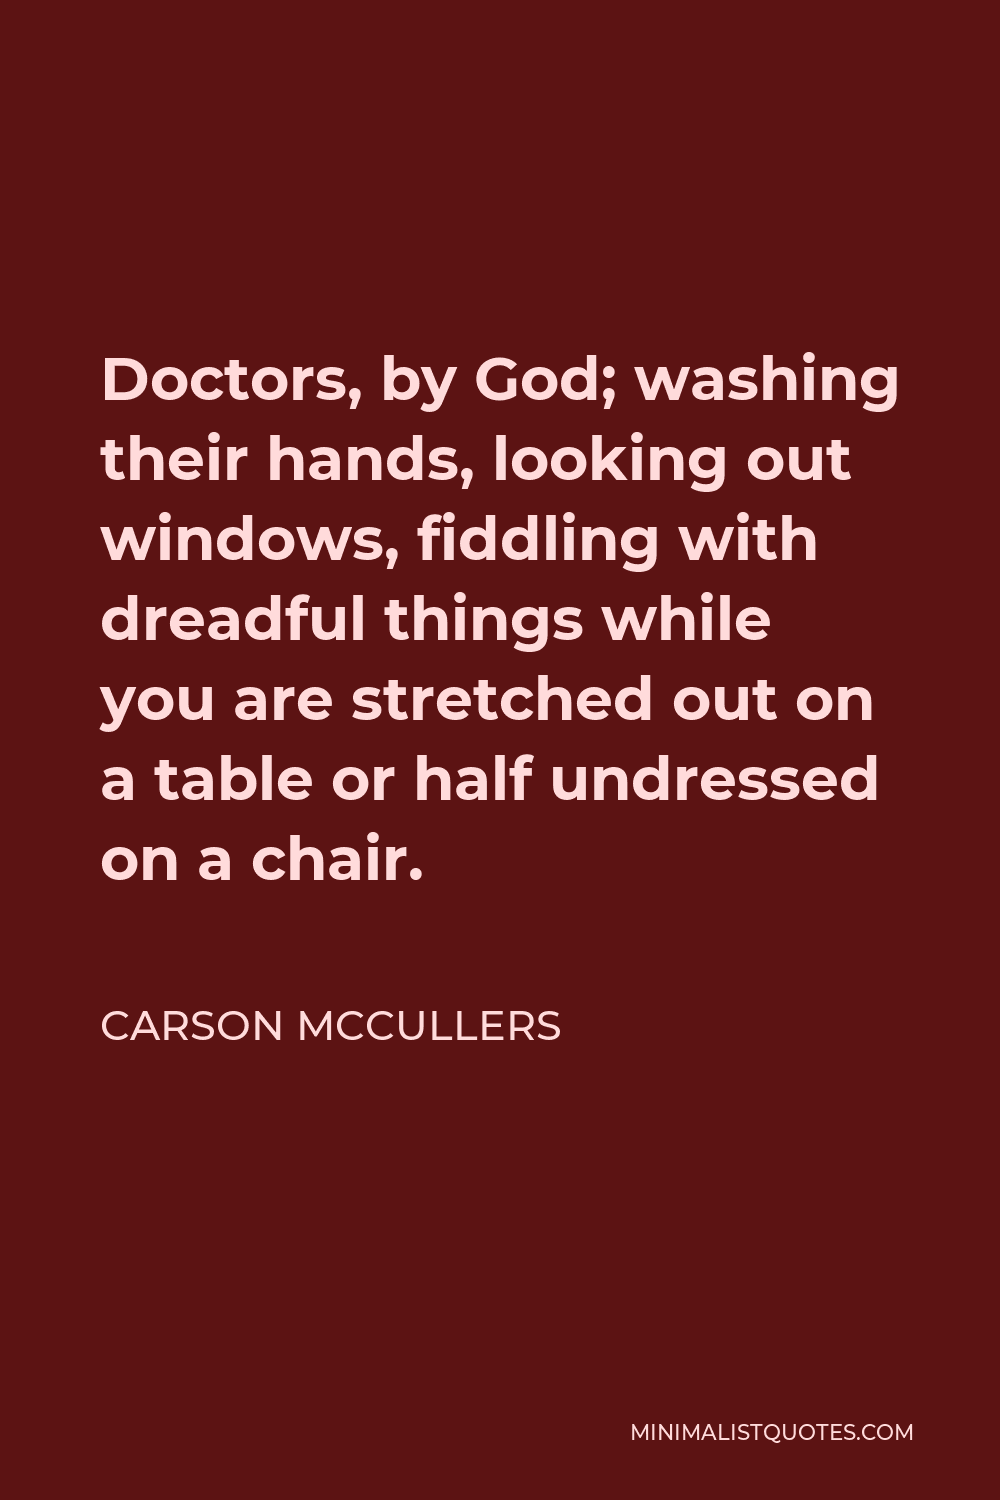 Carson McCullers Quote - Doctors, by God; washing their hands, looking out windows, fiddling with dreadful things while you are stretched out on a table or half undressed on a chair.